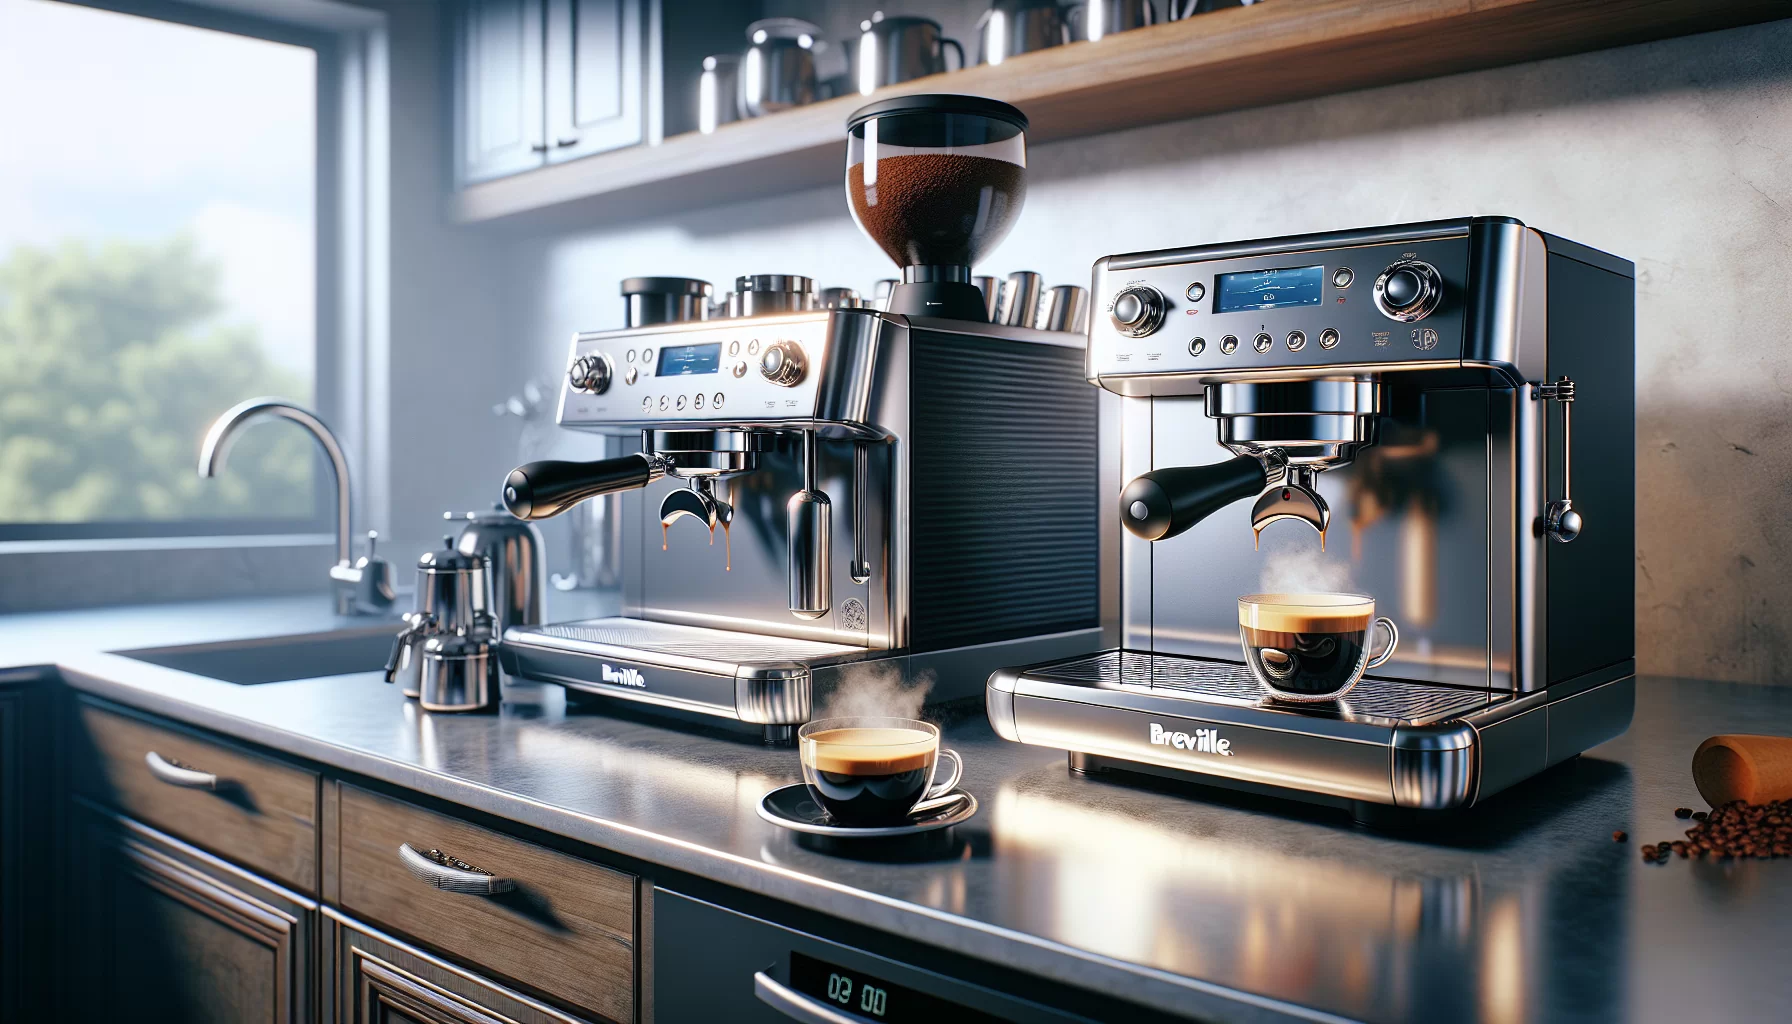 Breville espresso machines: elevating your home coffee experience with the barista express and oracle models